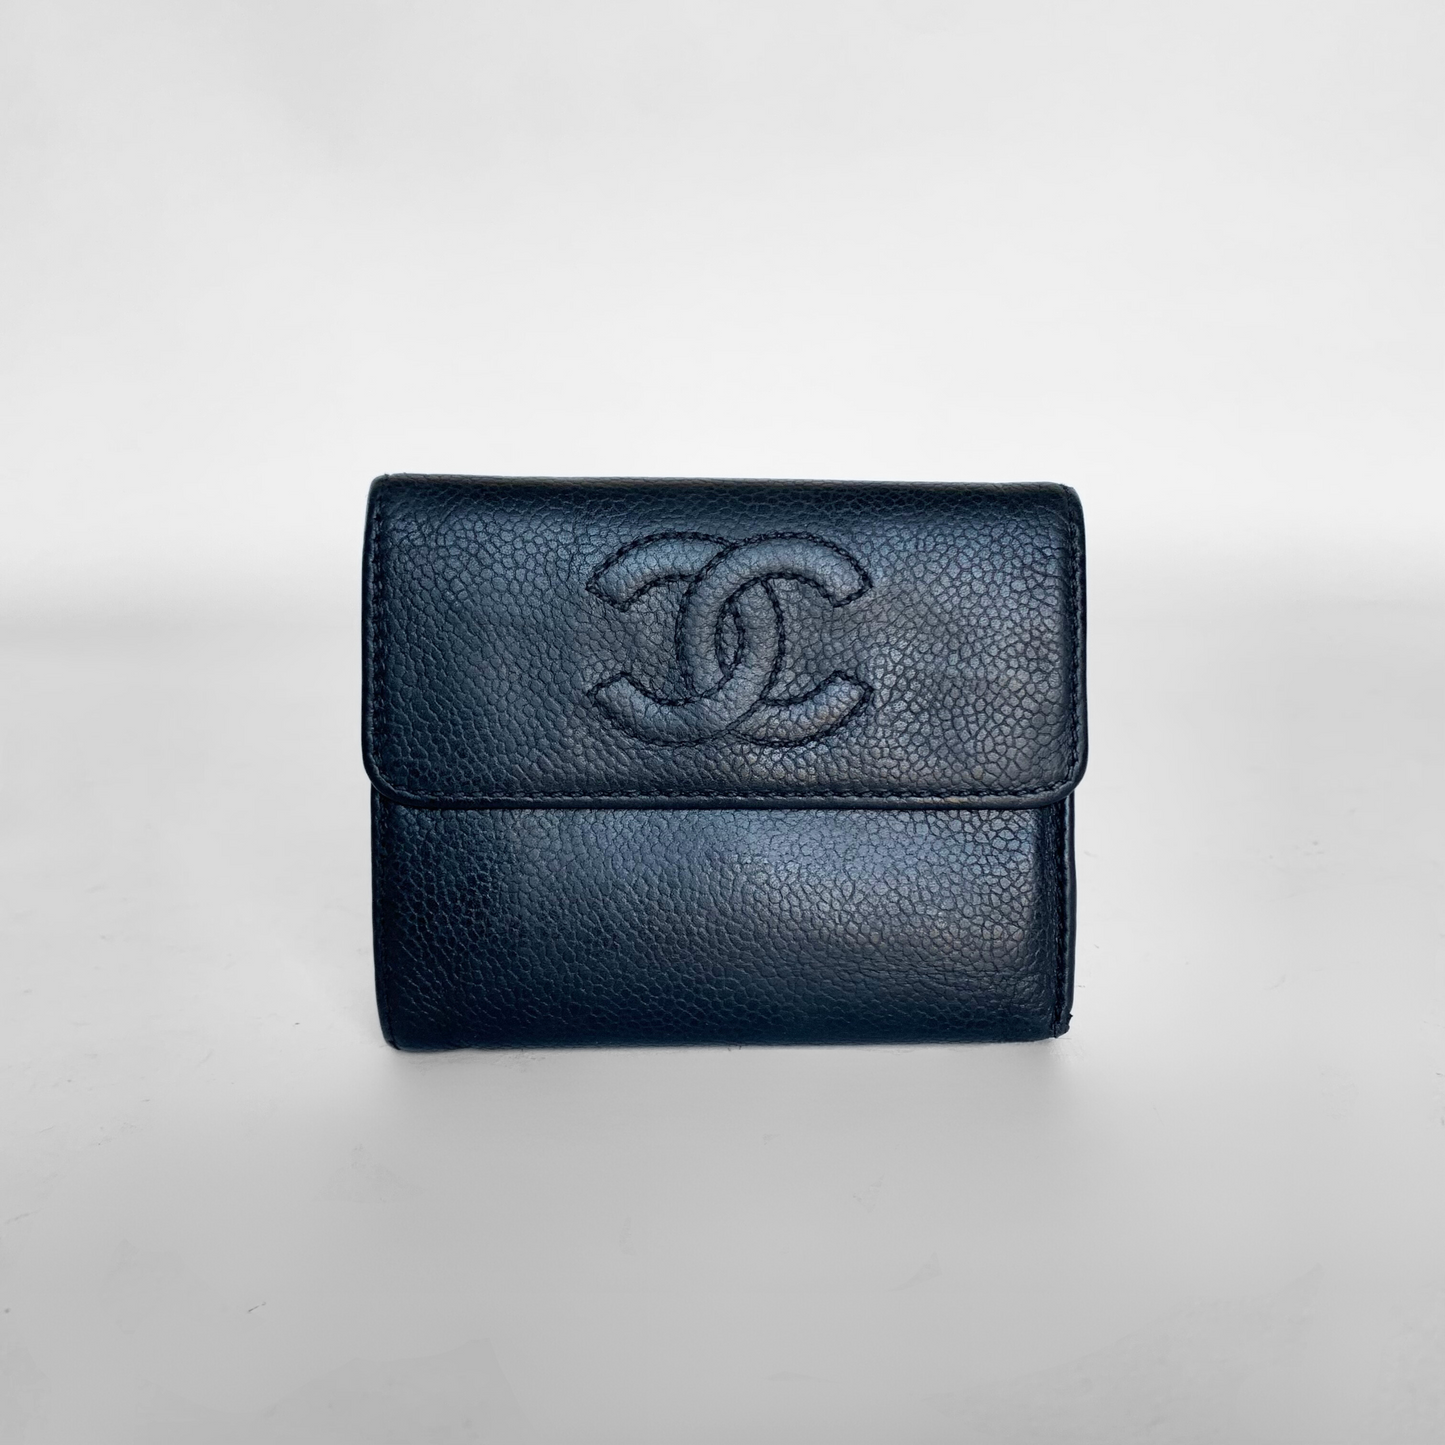 Chanel Chanel Wallet Small Caviar Leather - wallet - Etoile Luxury Vintage